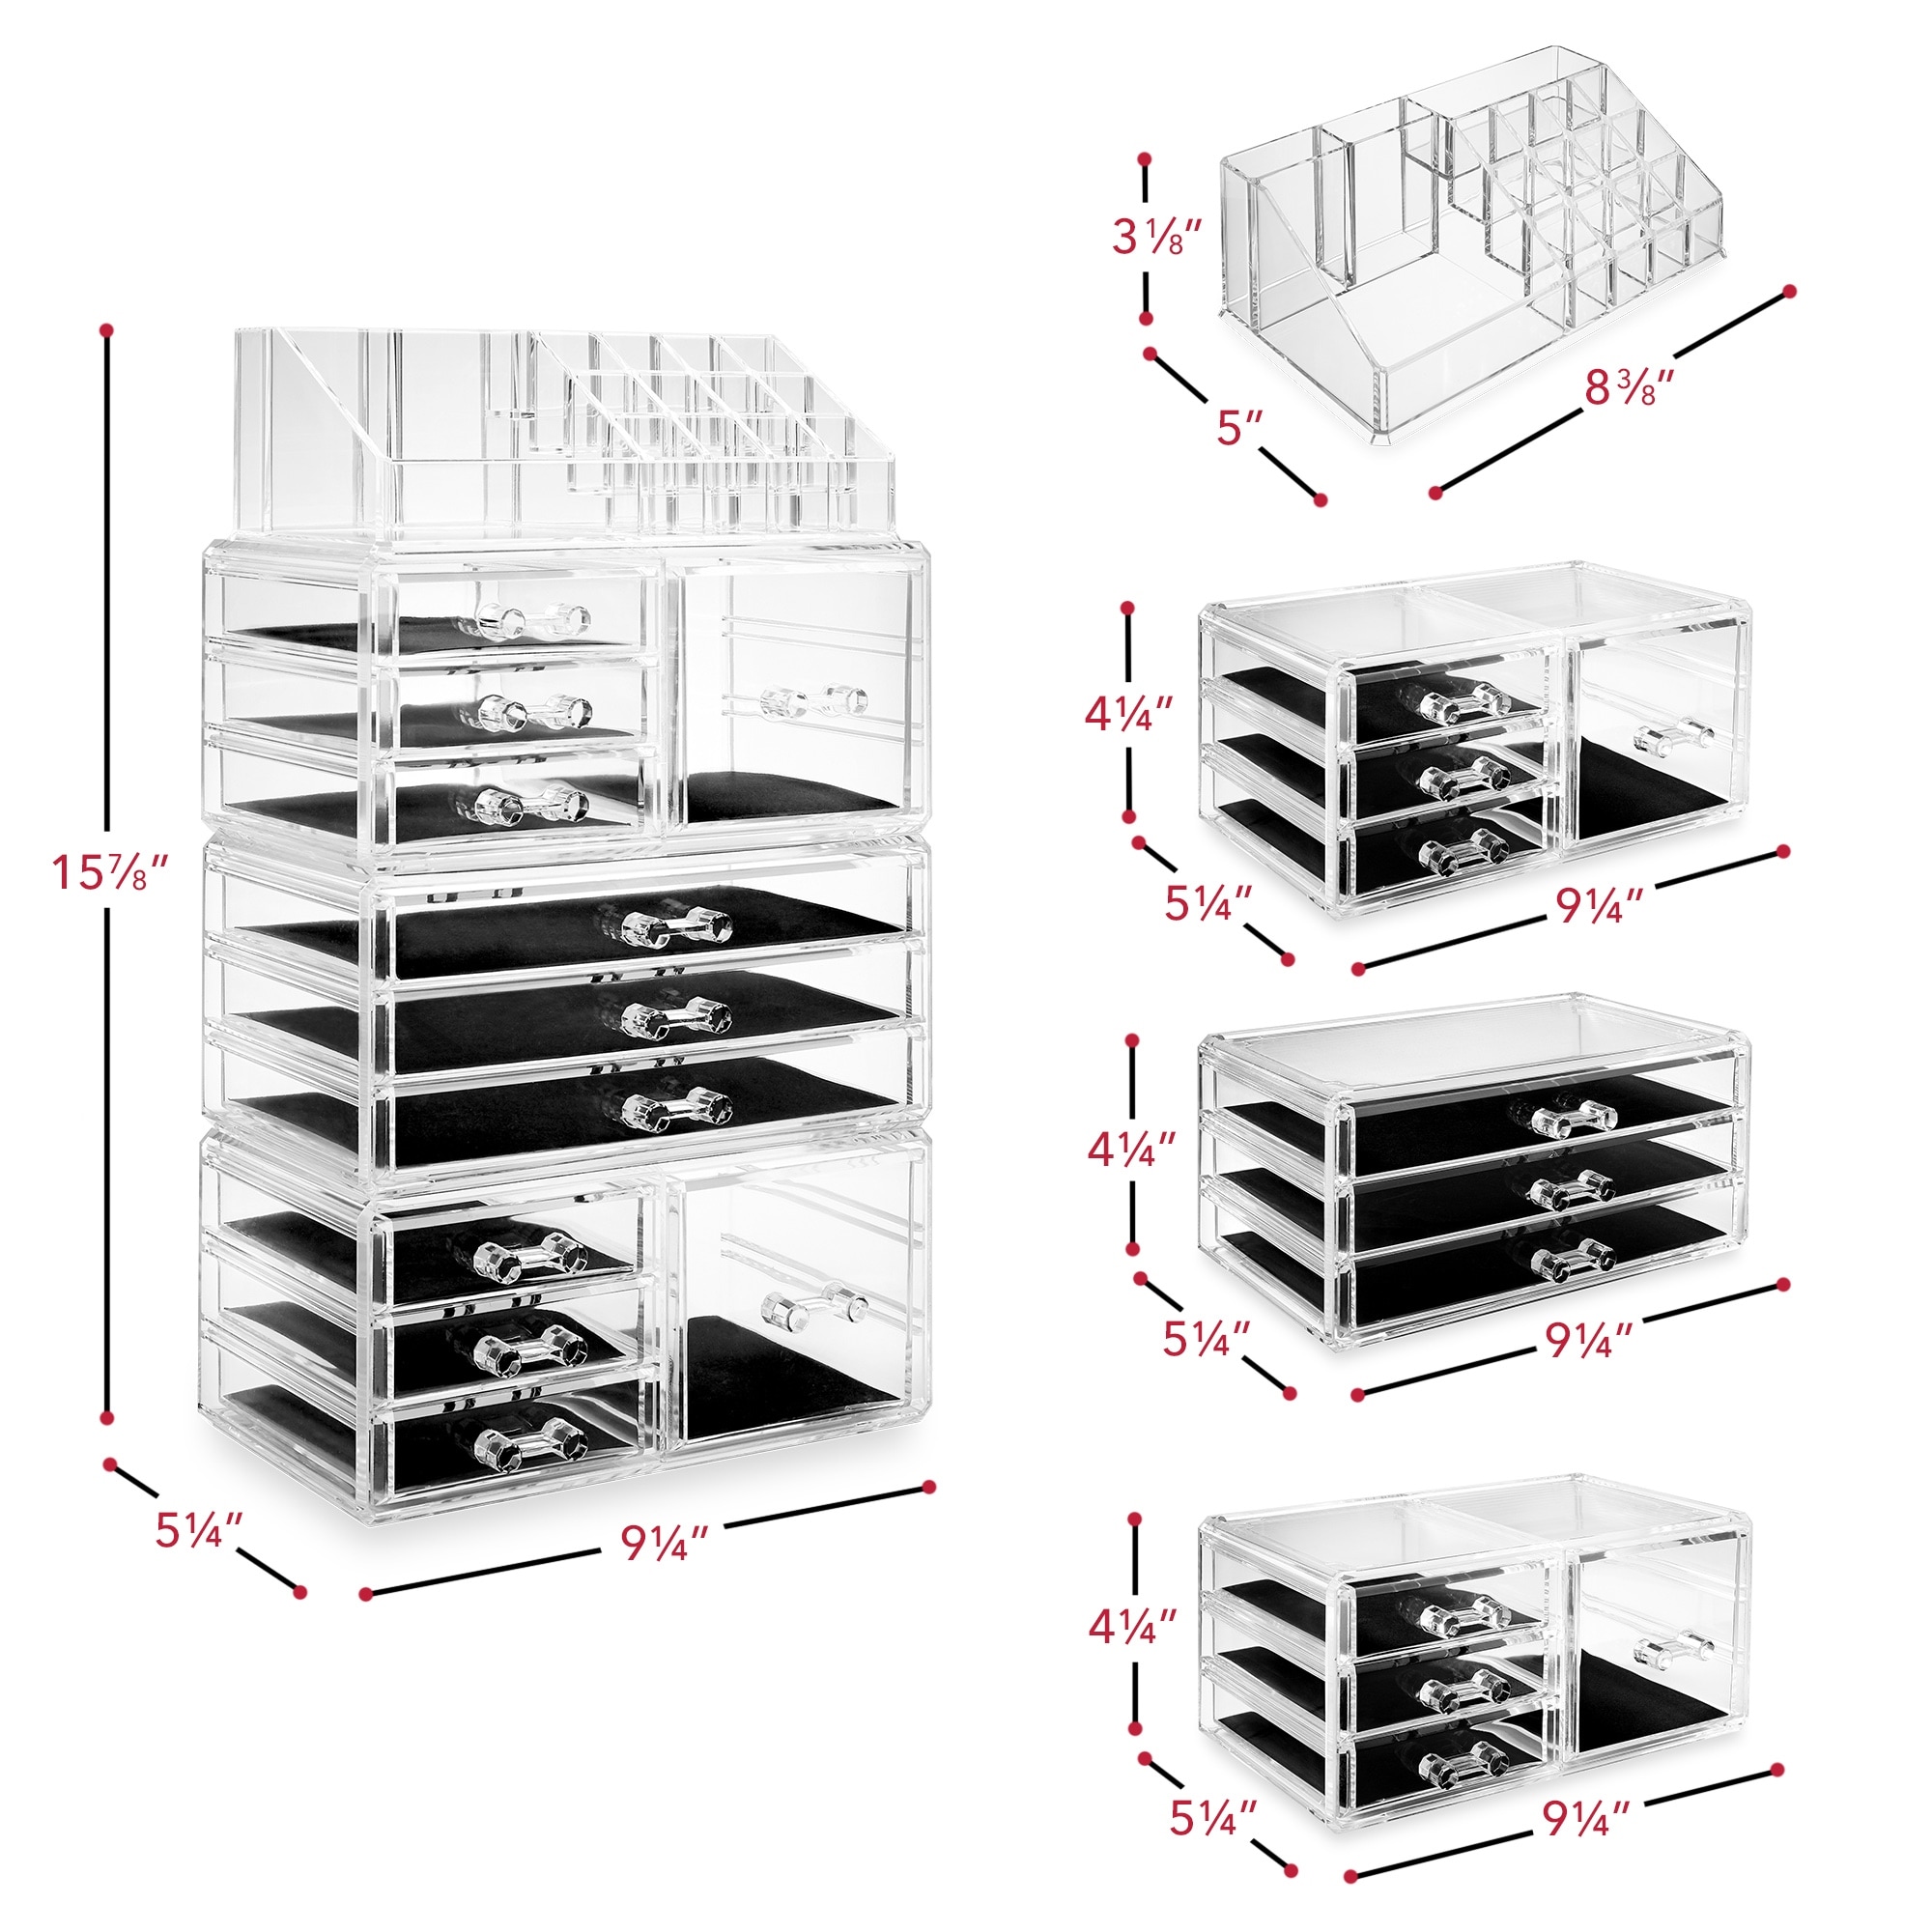 https://ak1.ostkcdn.com/images/products/is/images/direct/6a46785e8654e72077d15b17873553fdae731992/Acrylic-Cosmetic-Makeup-Organizer-%26-Jewelry-Storage-Set---Large.jpg